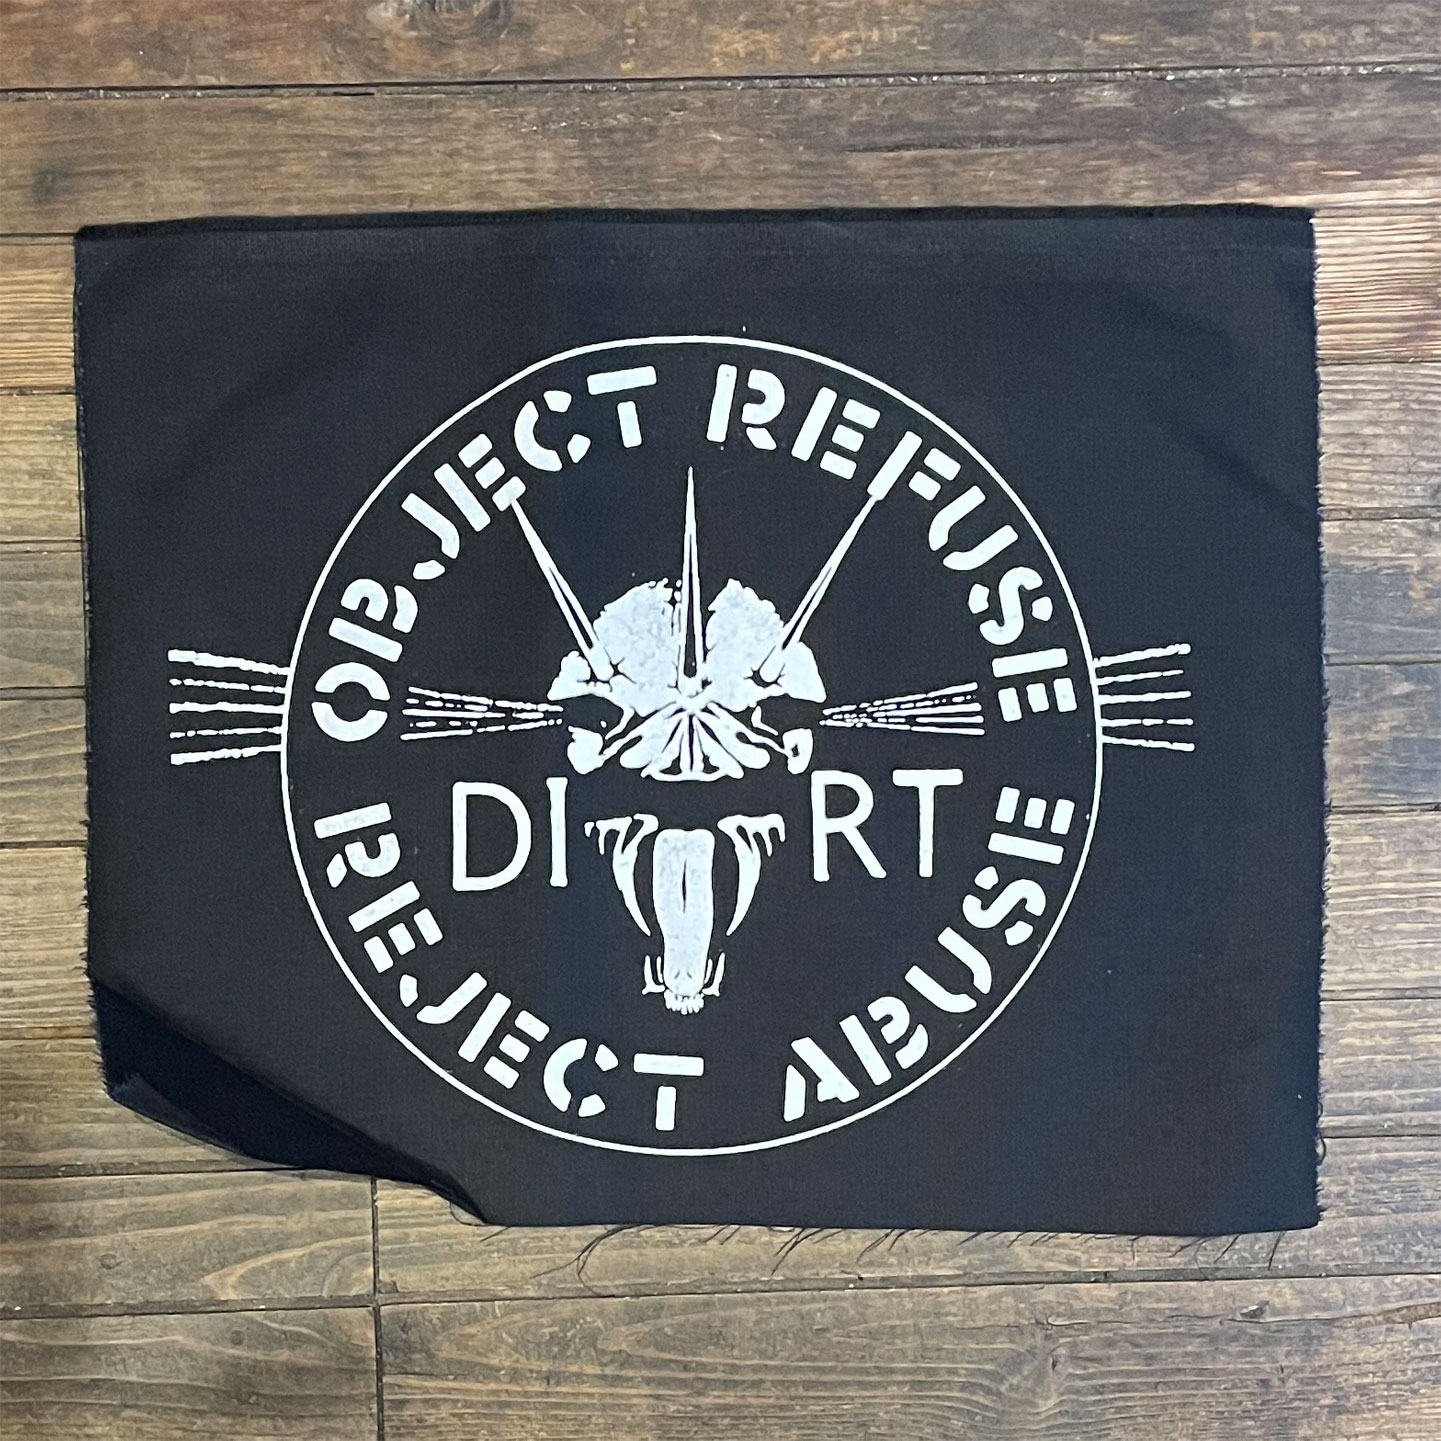 DIRT BACKPATCH OBJECT REFUSE